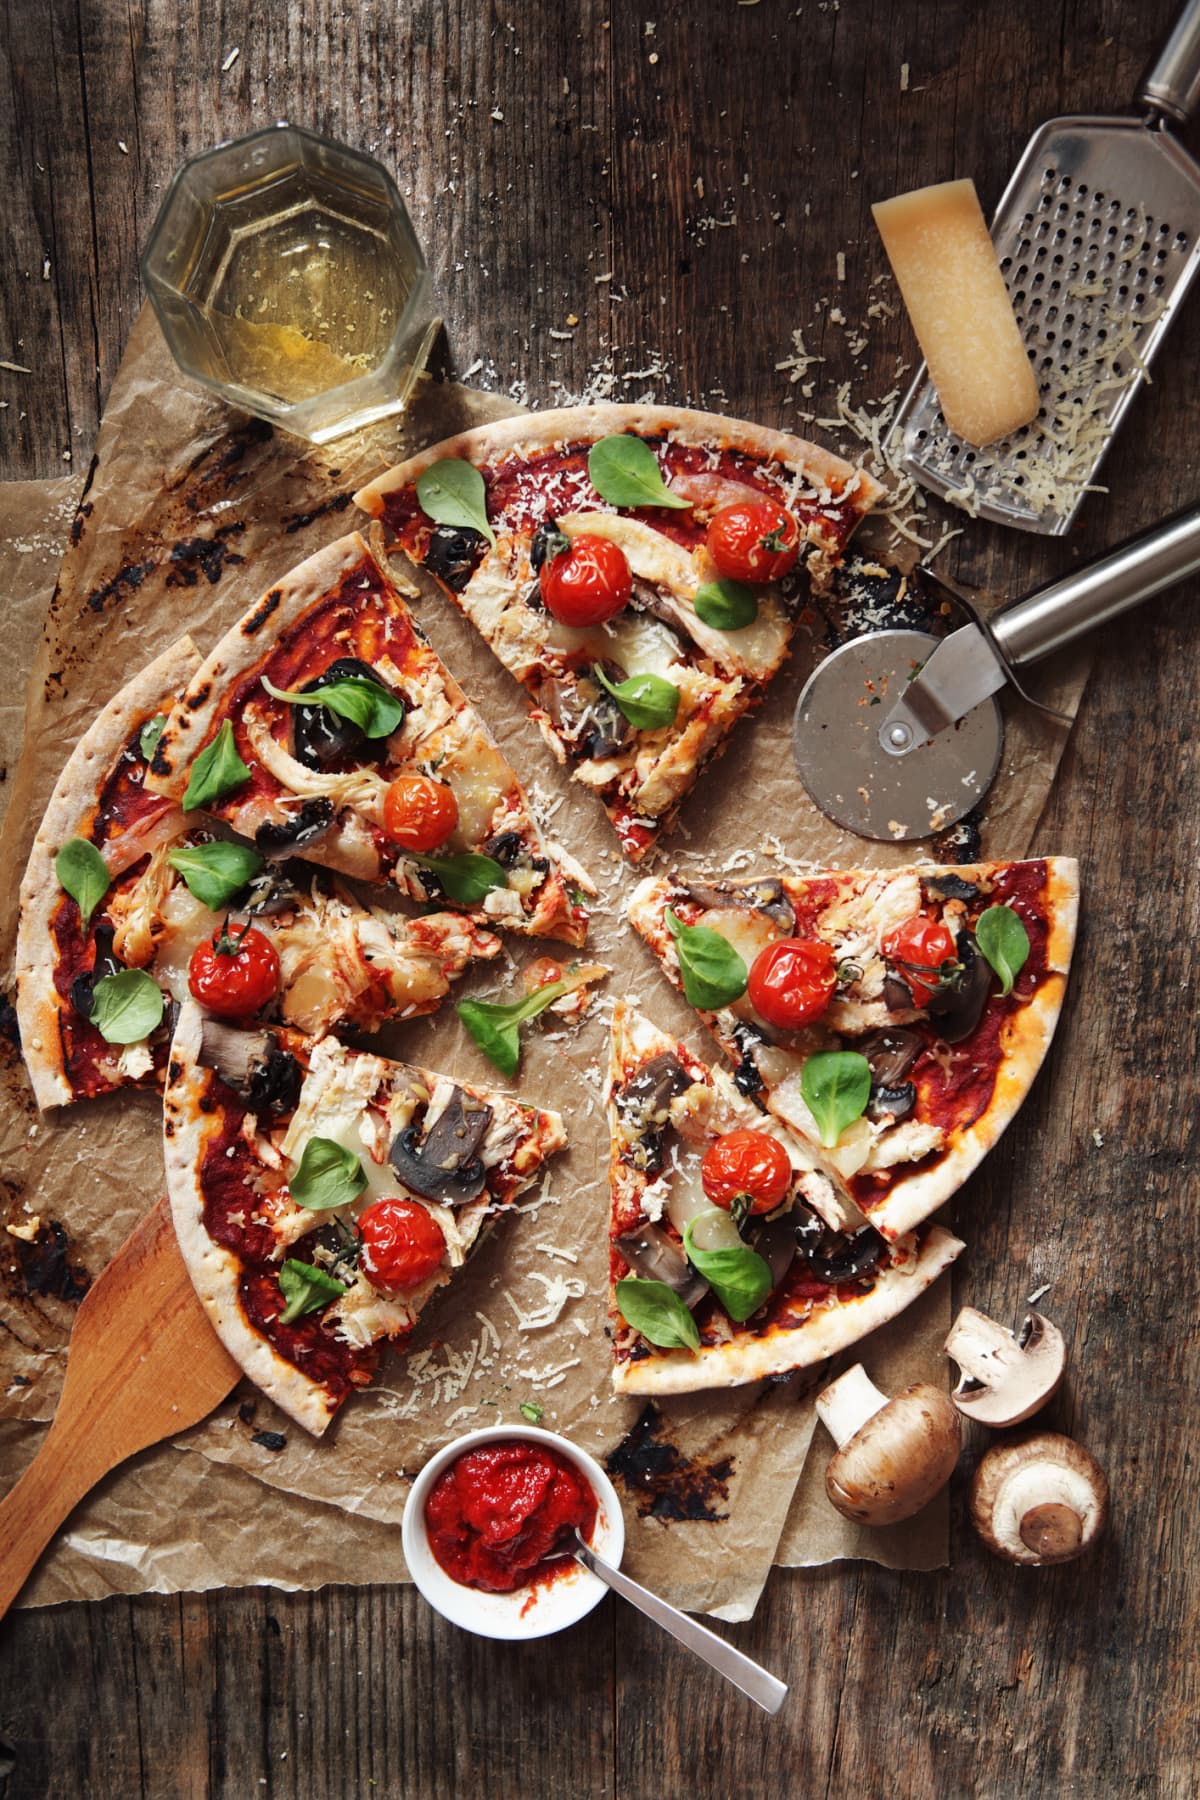 Pizza with tomatoes, spinach, and mushrooms cut into slices on wooden countertop